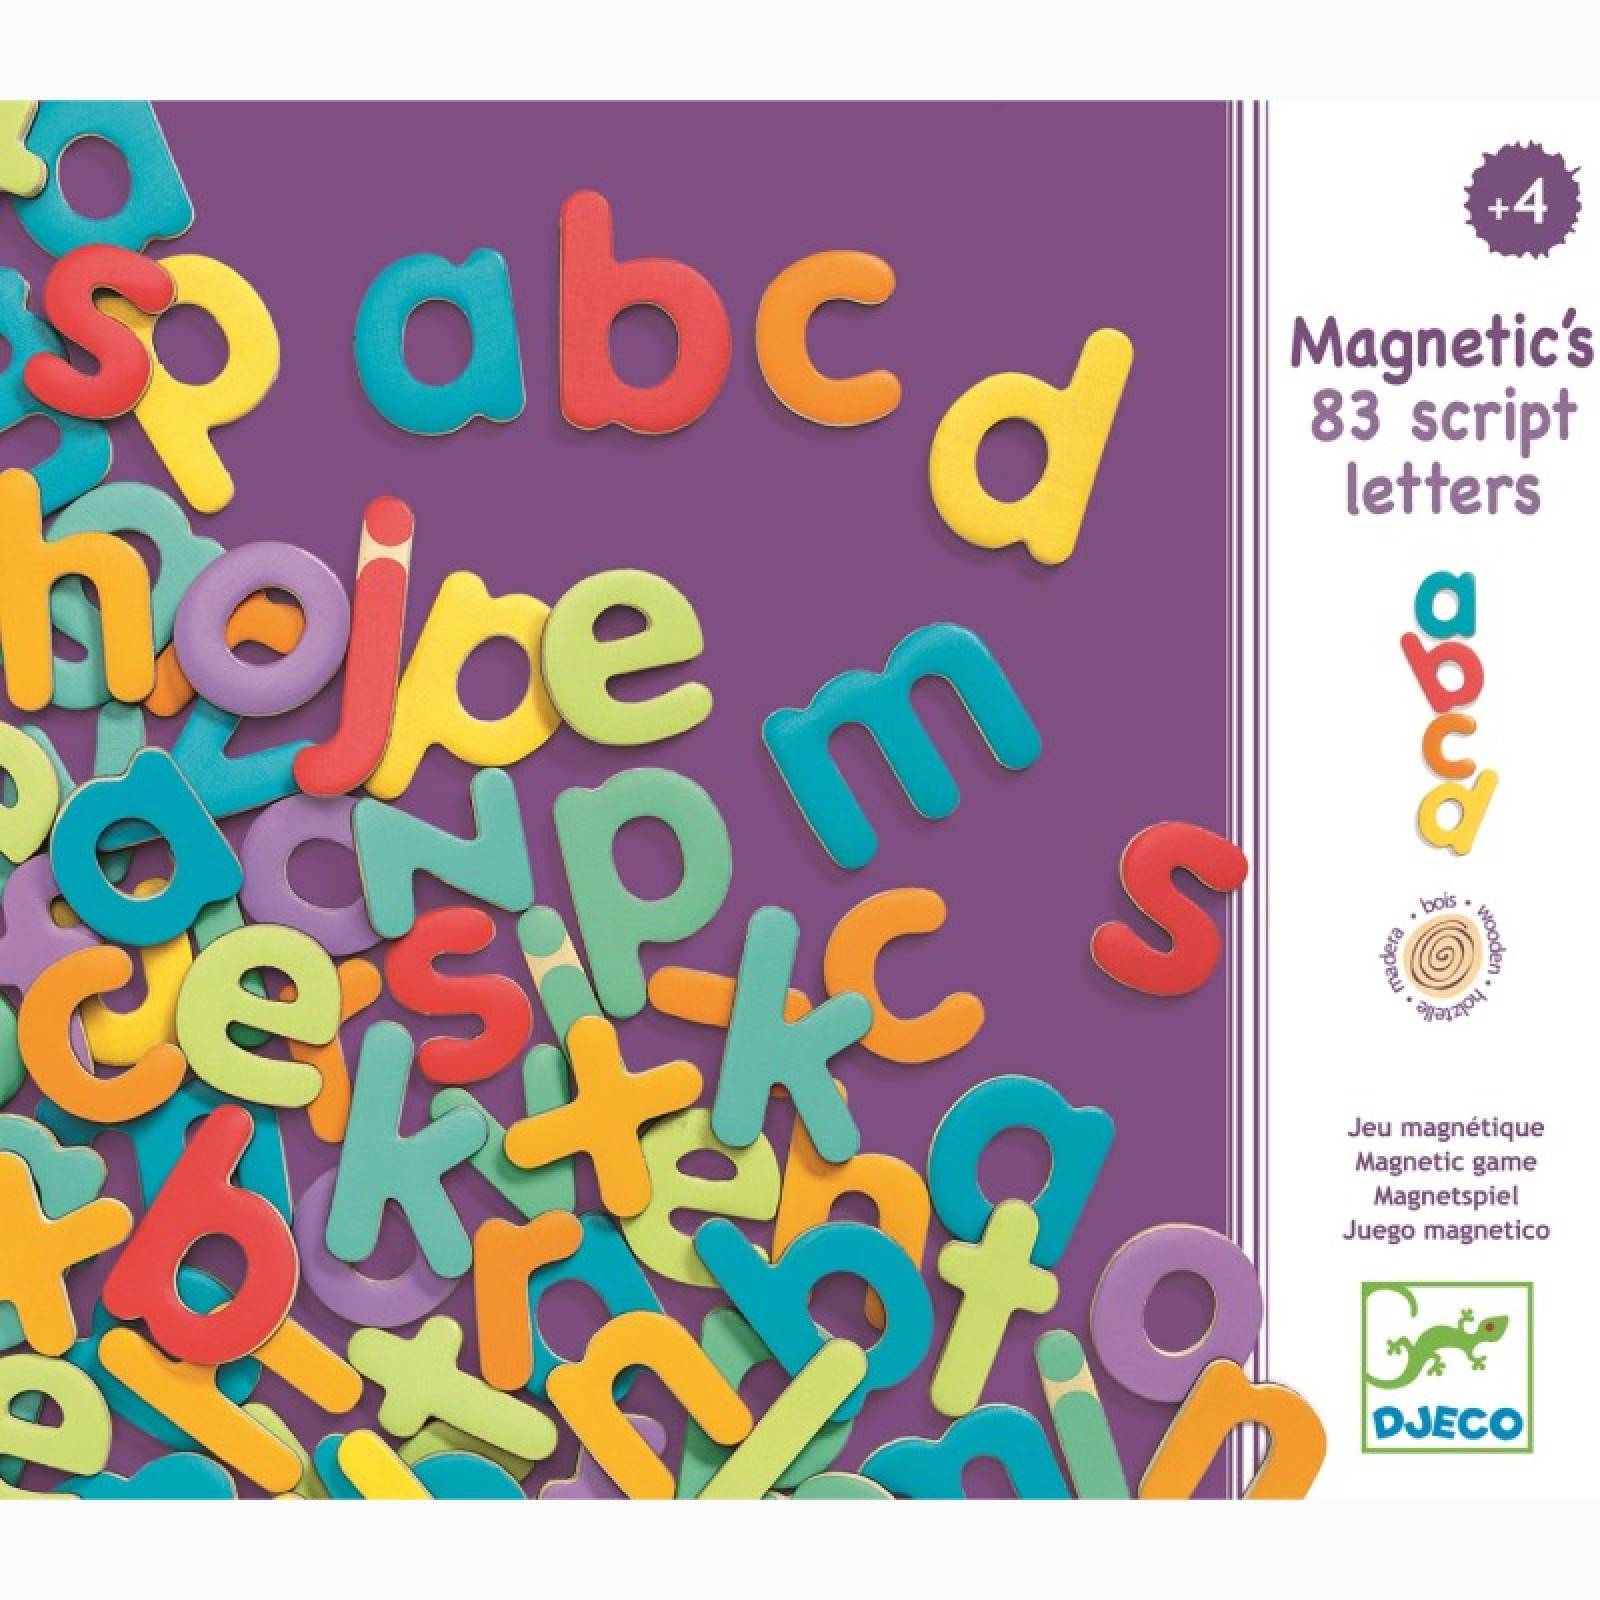 Box Of 83 Magnetic Lower Case Letters By Djeco 4+